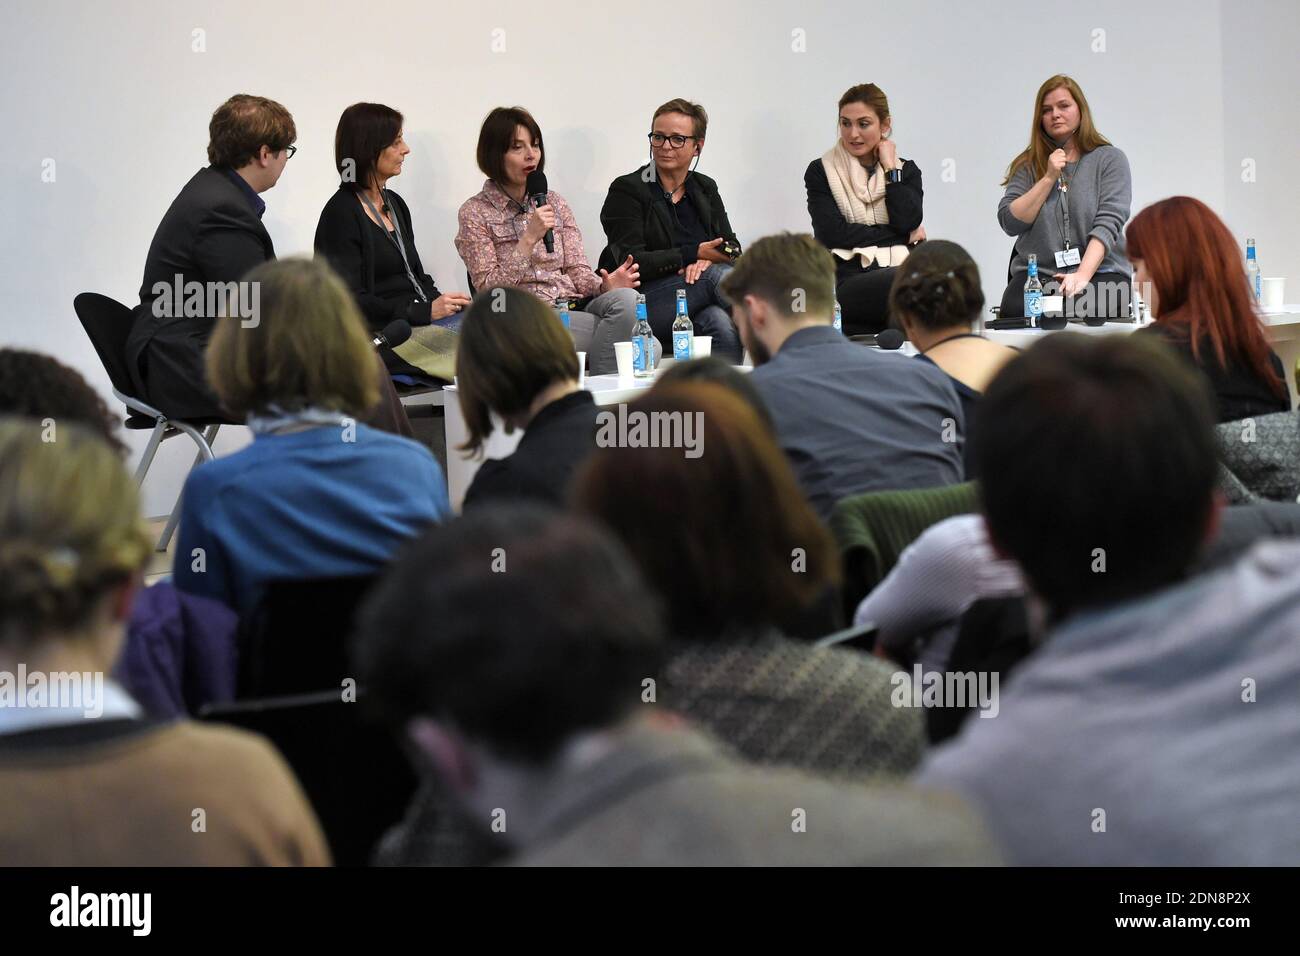 General atmosphere during the La Place Des Femmes Dans Le Cinema round table at the Museum fur Film und Fernsehen in Berlin, Germany on February 12, 2015. Photo by Aurore Marechal/ABACAPRESS.COM Stock Photo